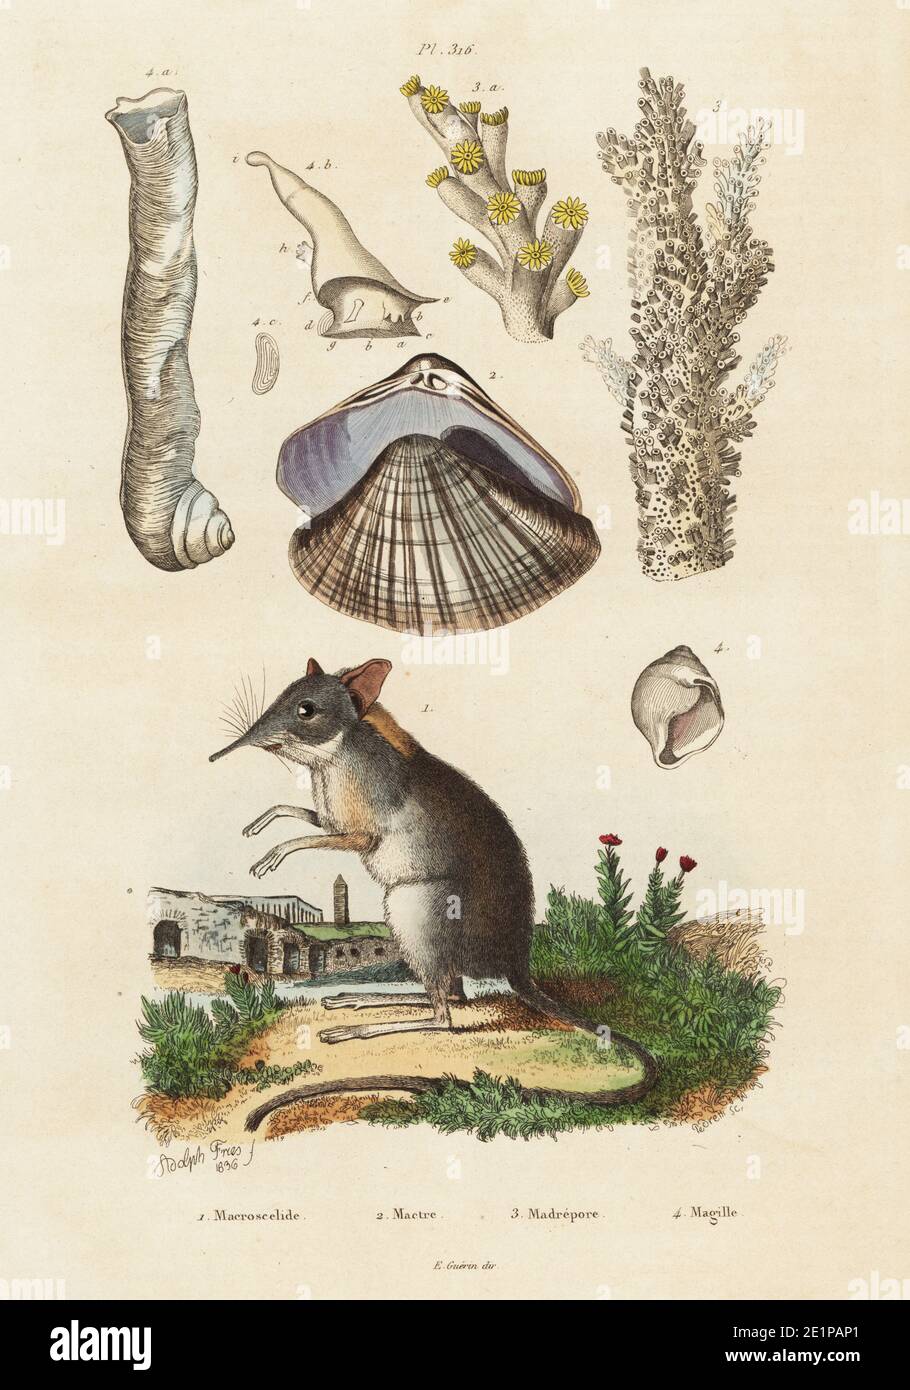 Round-eared elephant shrew, Macroscelides proboscideus (Macroscelides typus) 1, Atlantic surf clam, Spisula solidissima (Mactra gigantea) 2, staghorn coral, Acropora muricata (Madrepora muricata) 3, Magilus coral snail, Magilus antiquus 4. Handcoloured steel engraving by Pedretti after an illustration by Adolph Fries from Felix-Edouard Guerin-Meneville's Dictionnaire Pittoresque d'Histoire Naturelle (Picturesque Dictionary of Natural History), Paris, 1834-39. Stock Photo